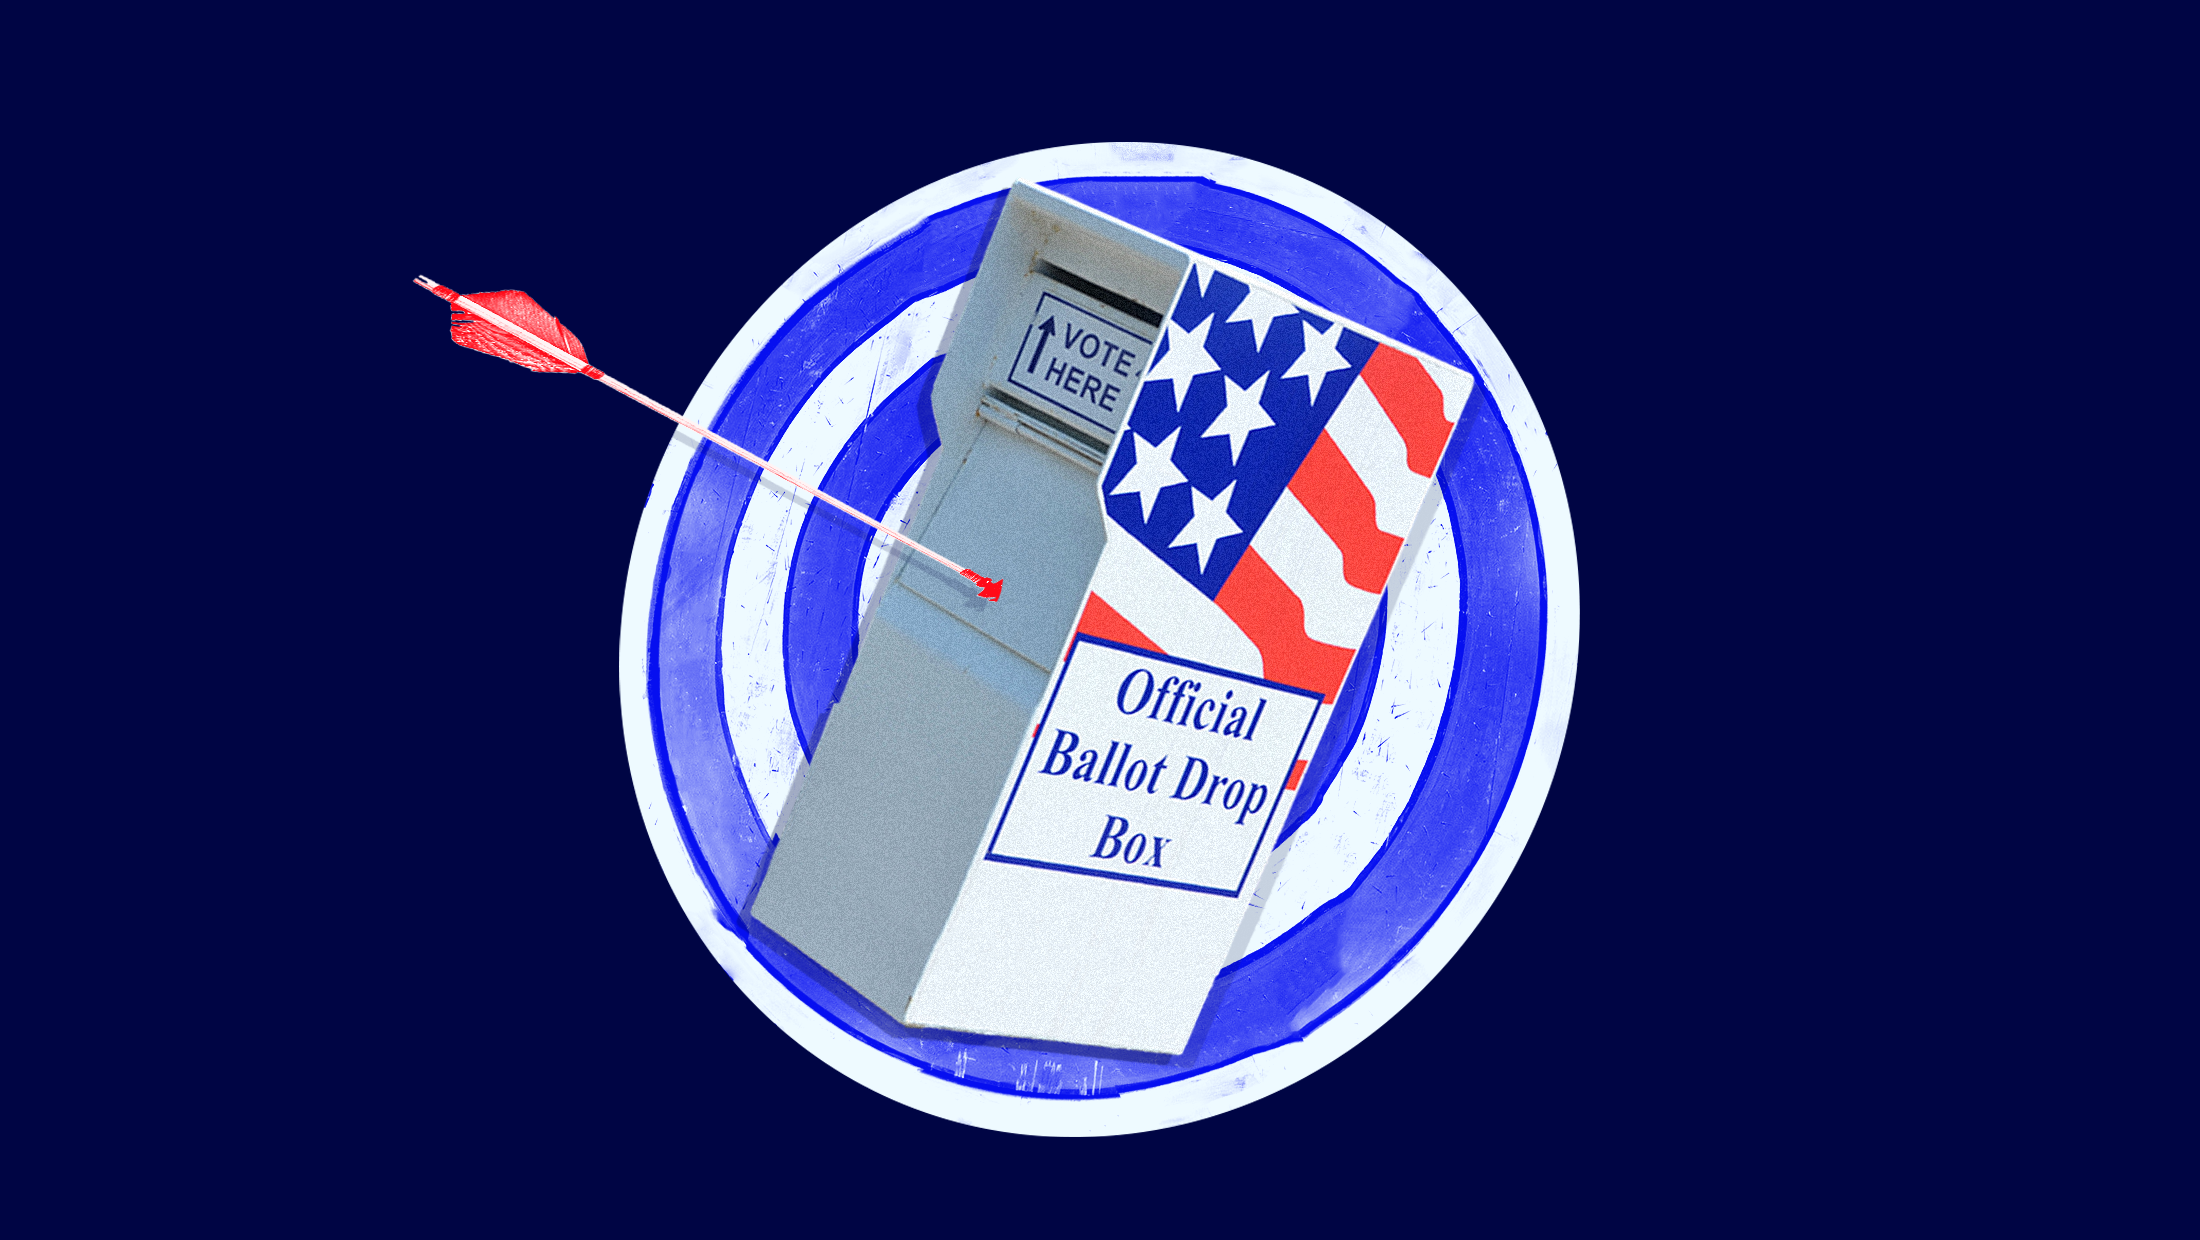 A ballot drop box with an arrow sticking out of it on a blue target.